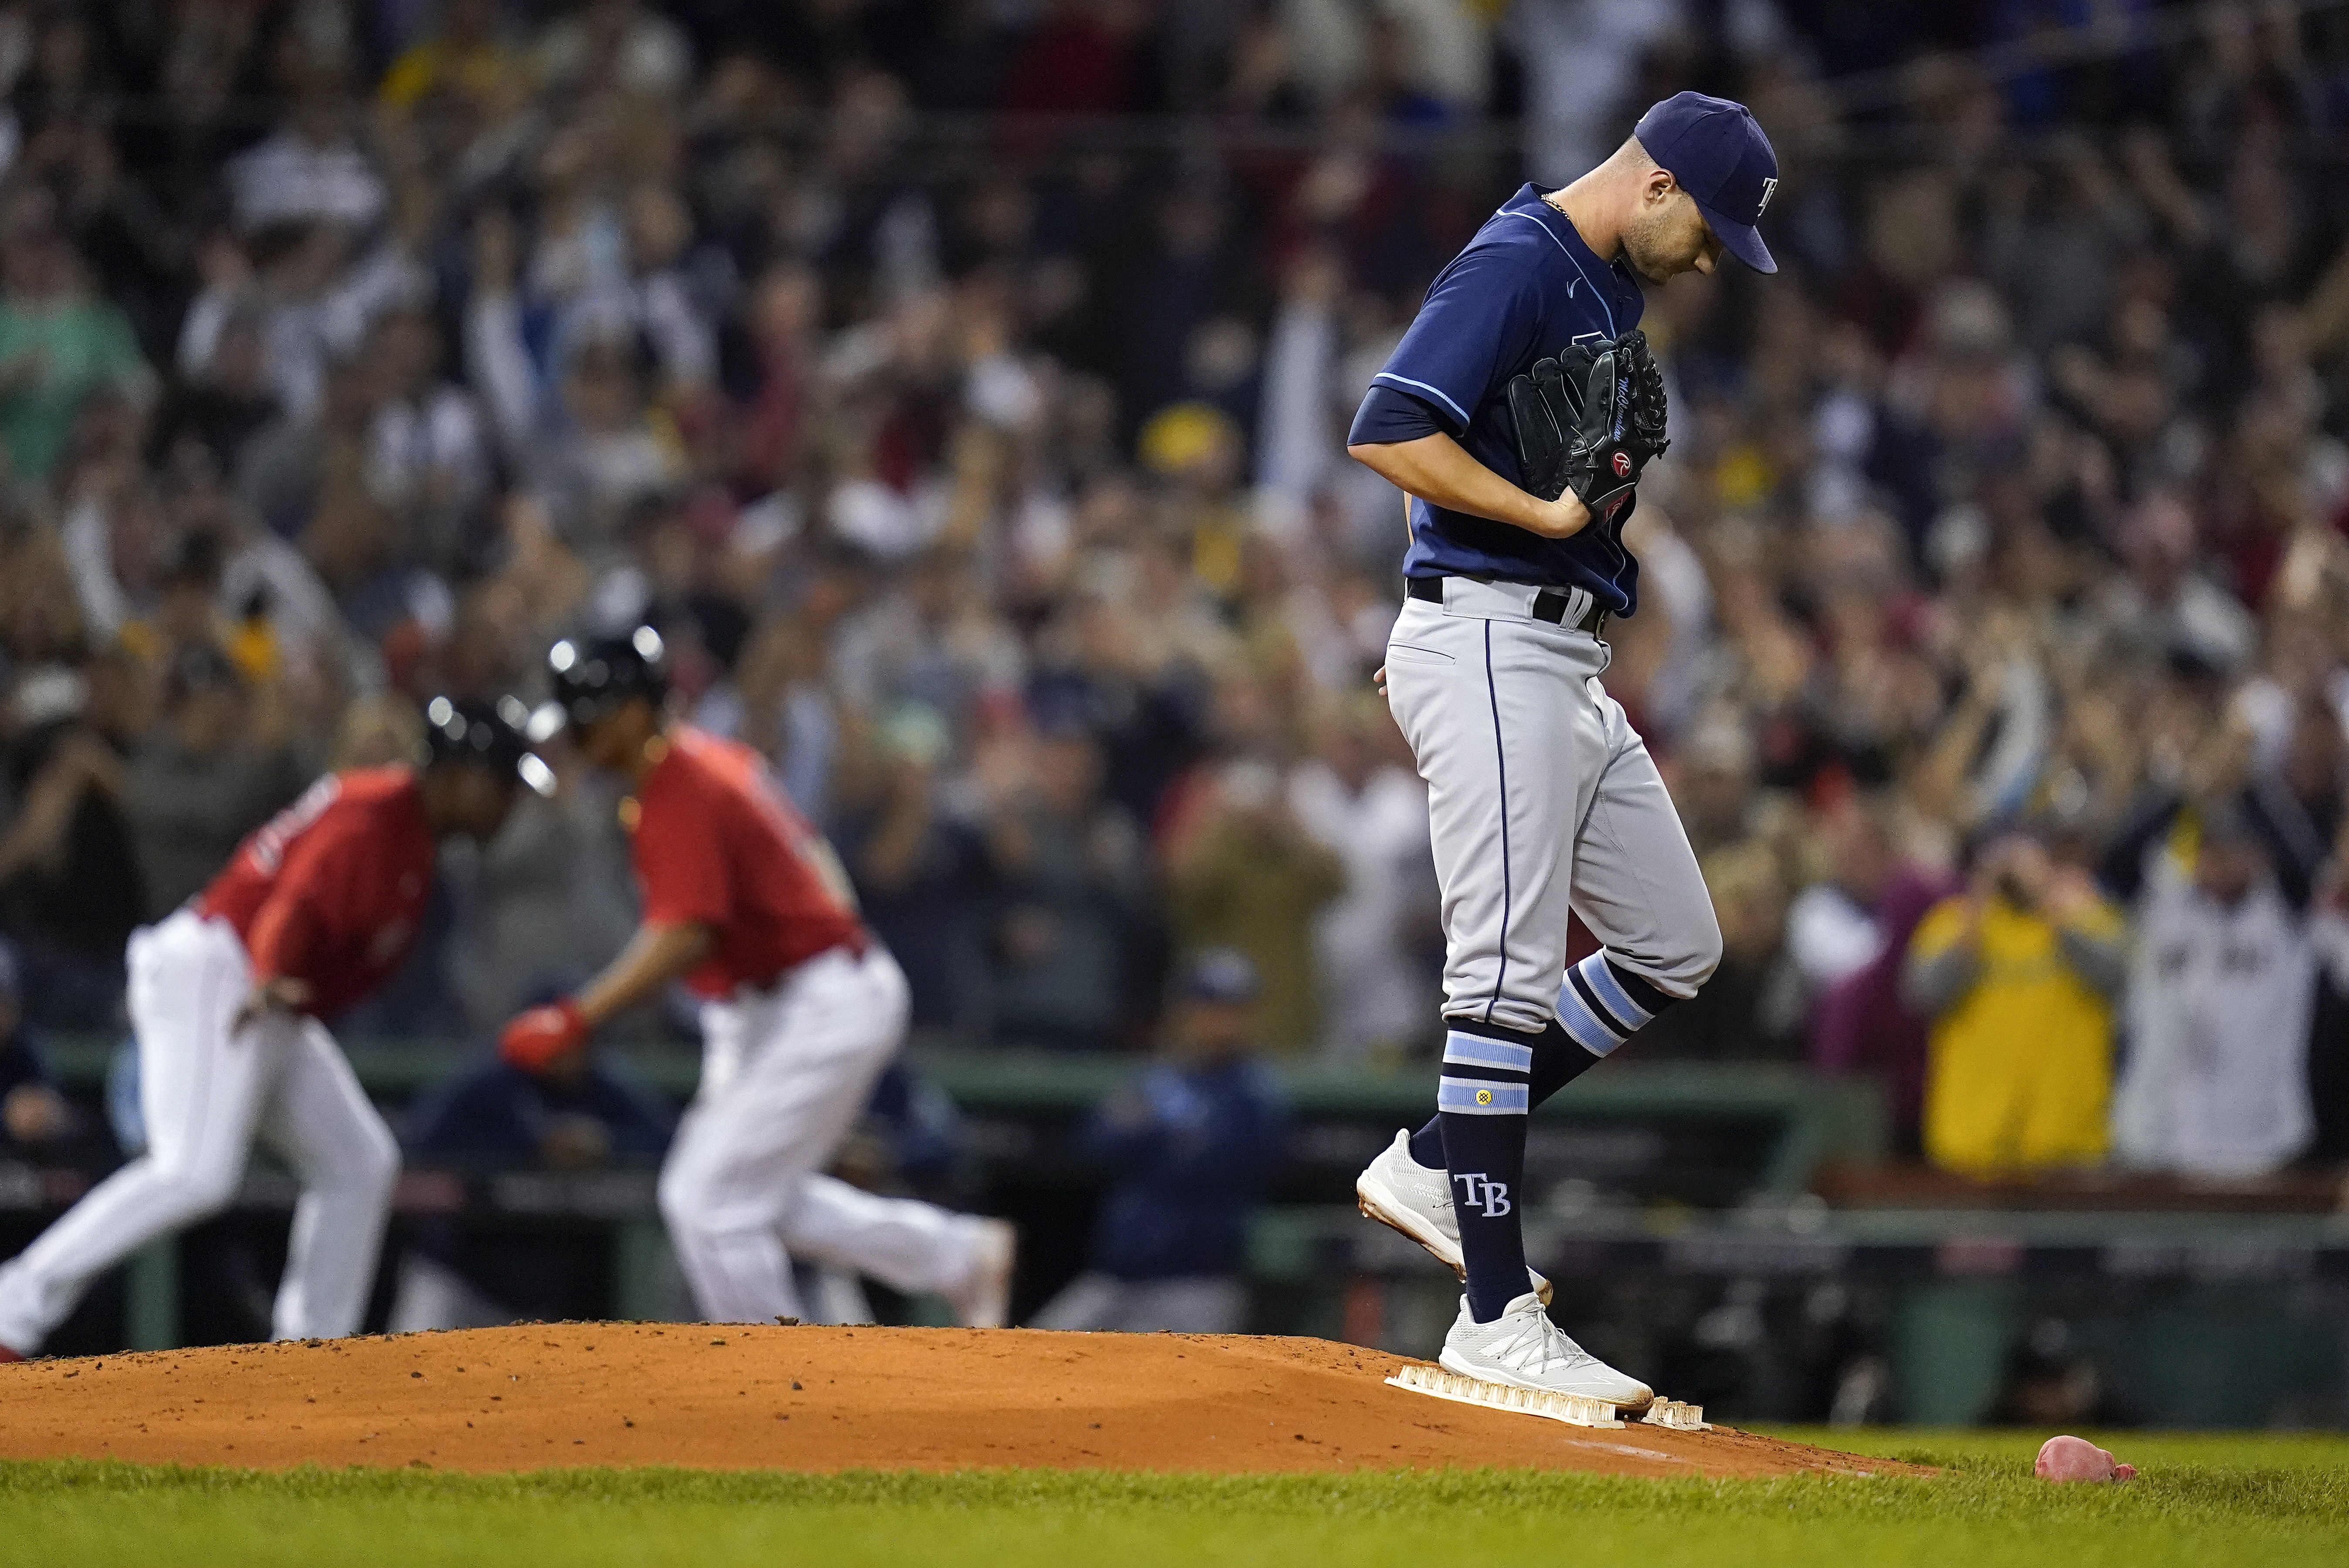 McClanahan sharp, Rays blank Tigers, 4-0, on opening day – The